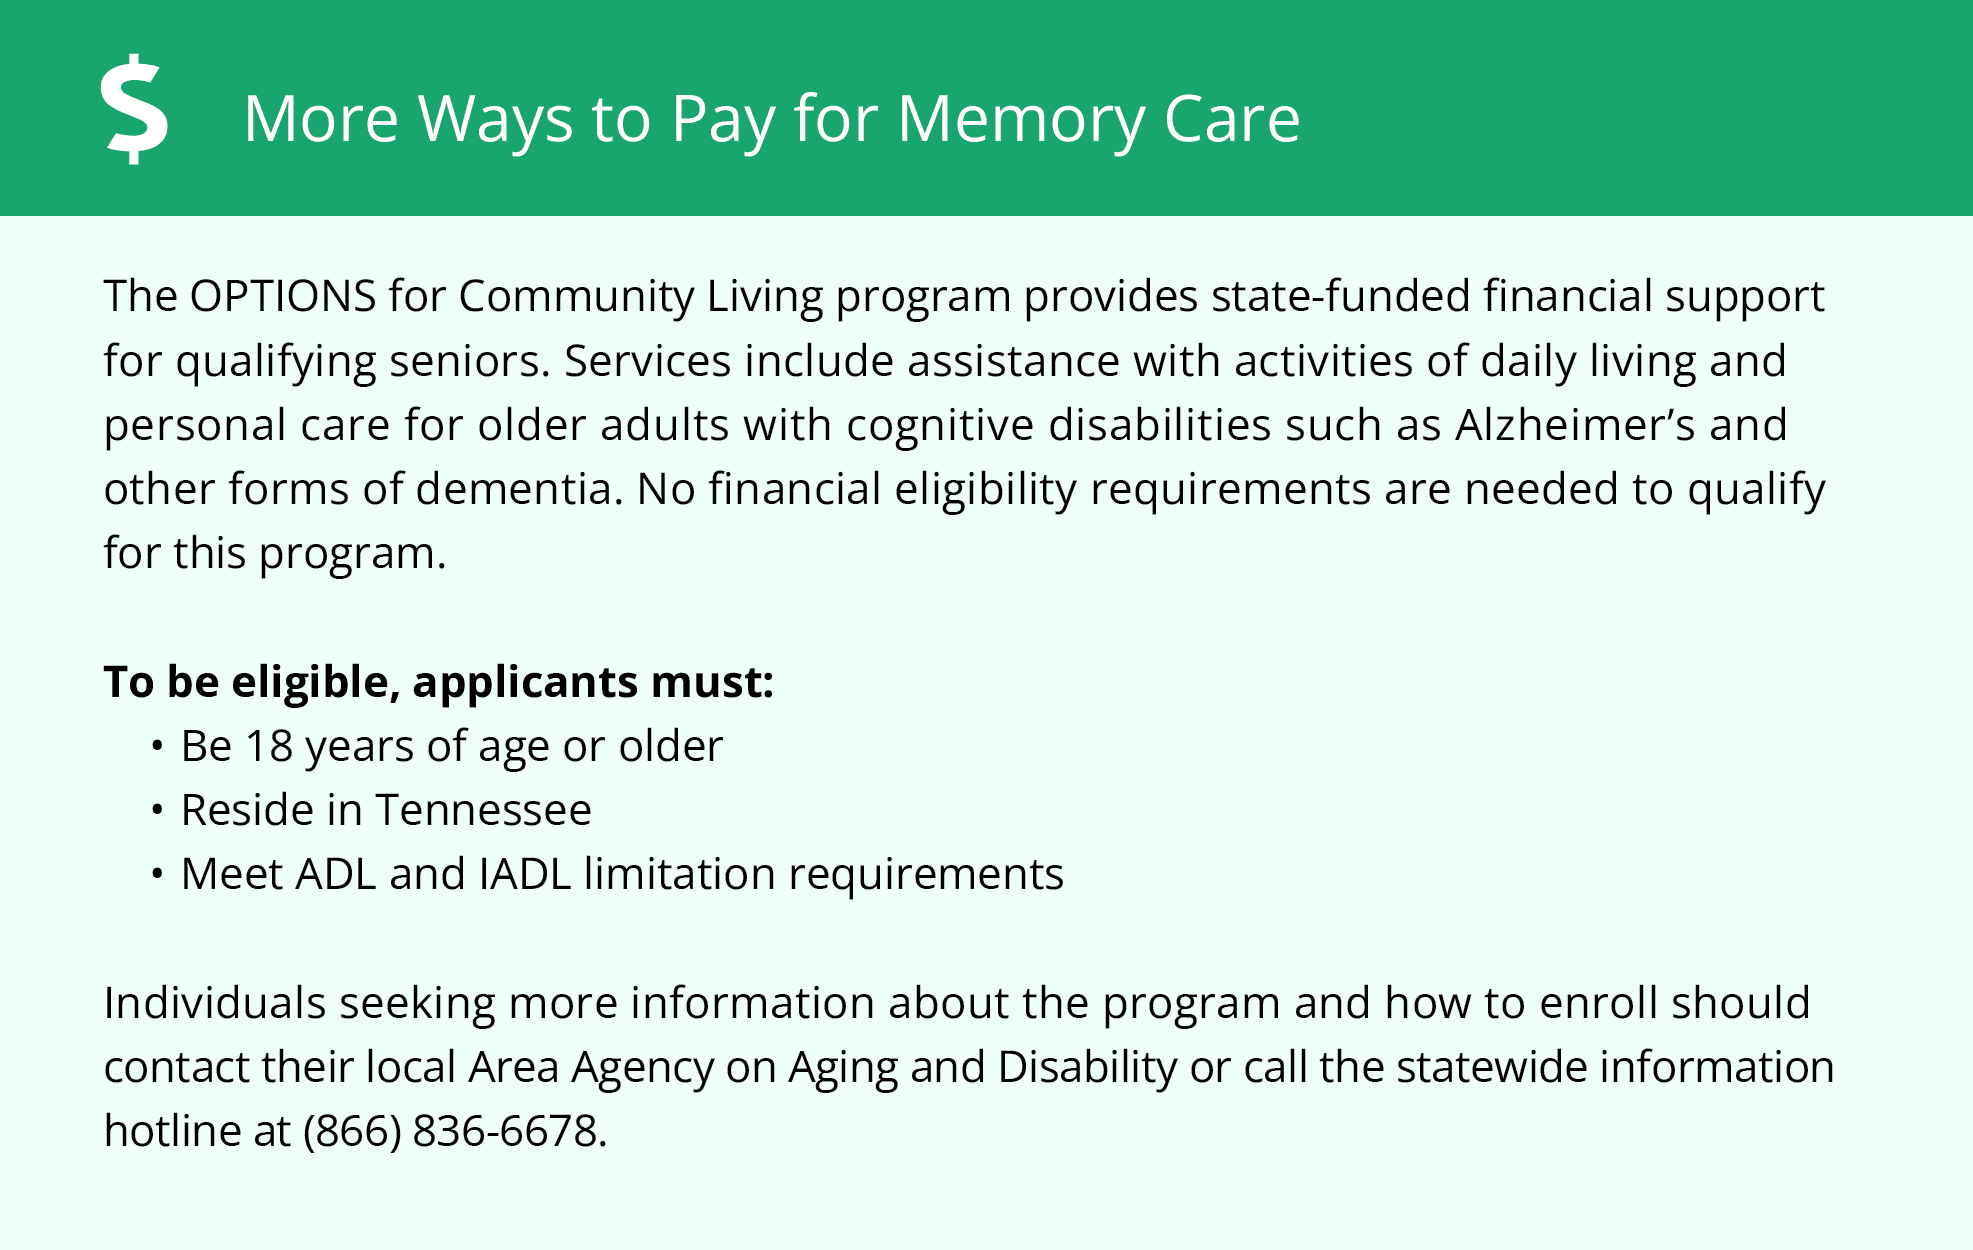 Financial Assistance for Memory Care in Tennessee